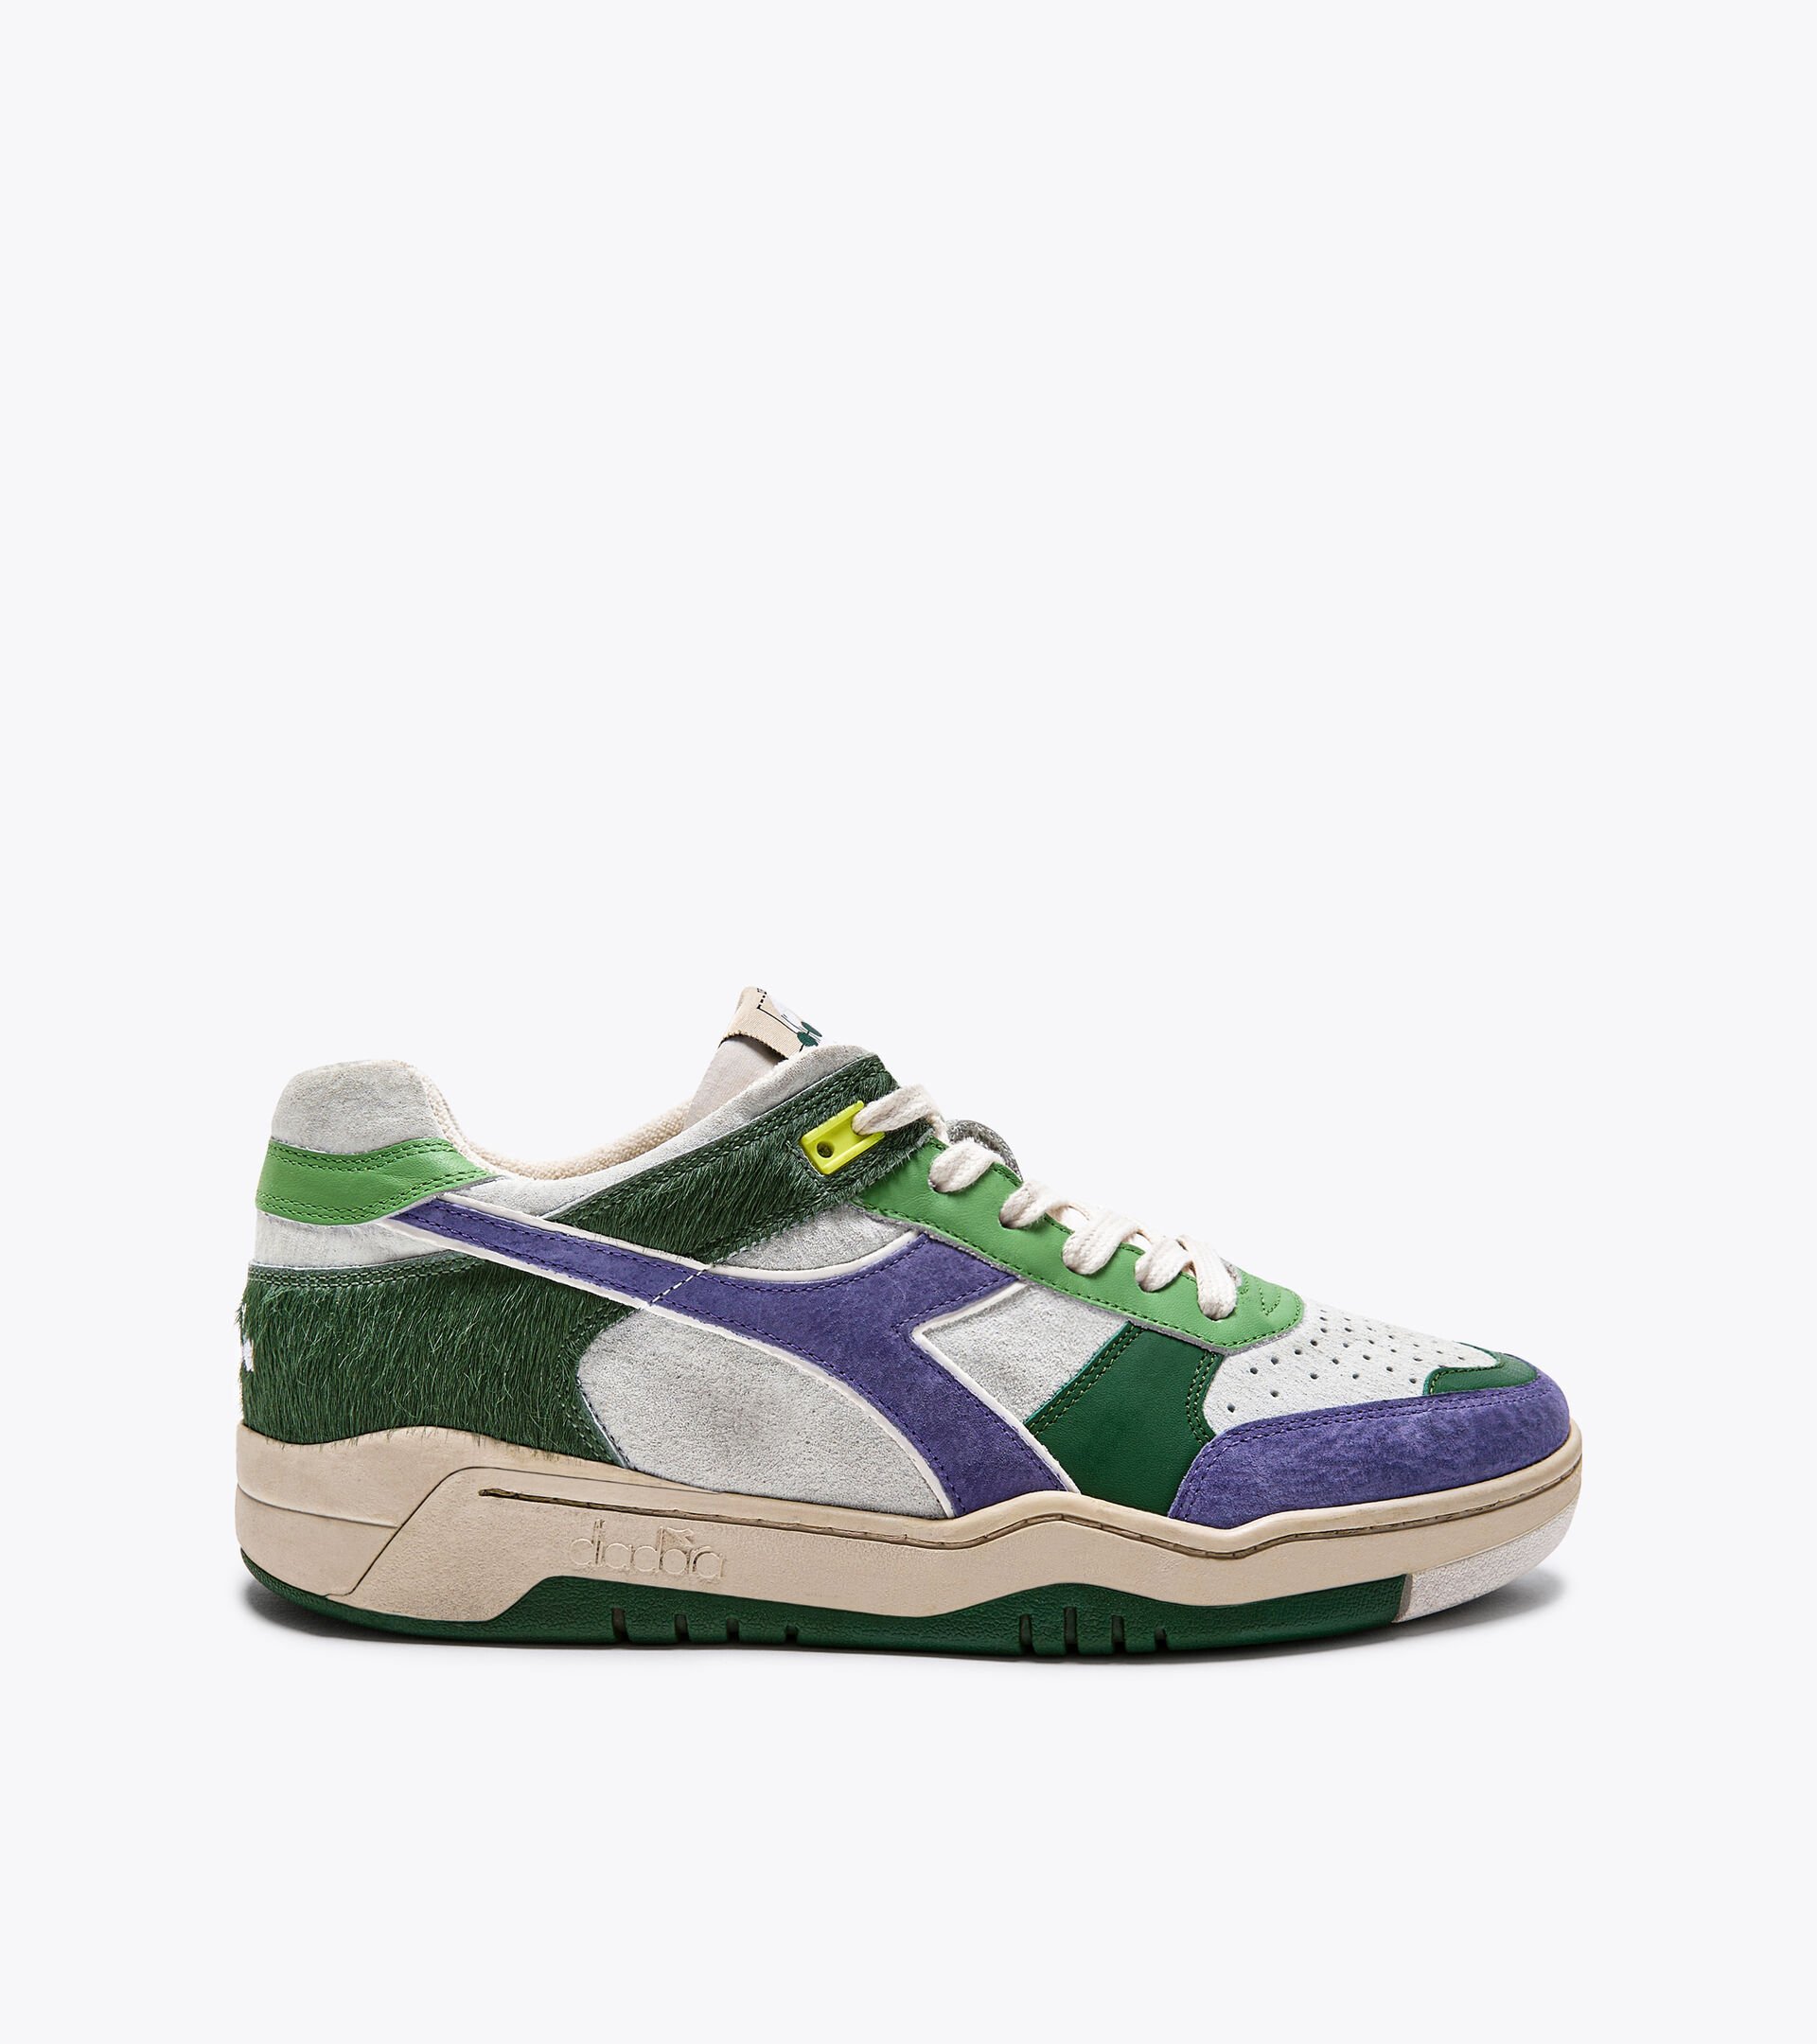 B.560 USED WW ITALIA Heritage shoe - Made In Italy - Gender Neutral -  Diadora Online Store US